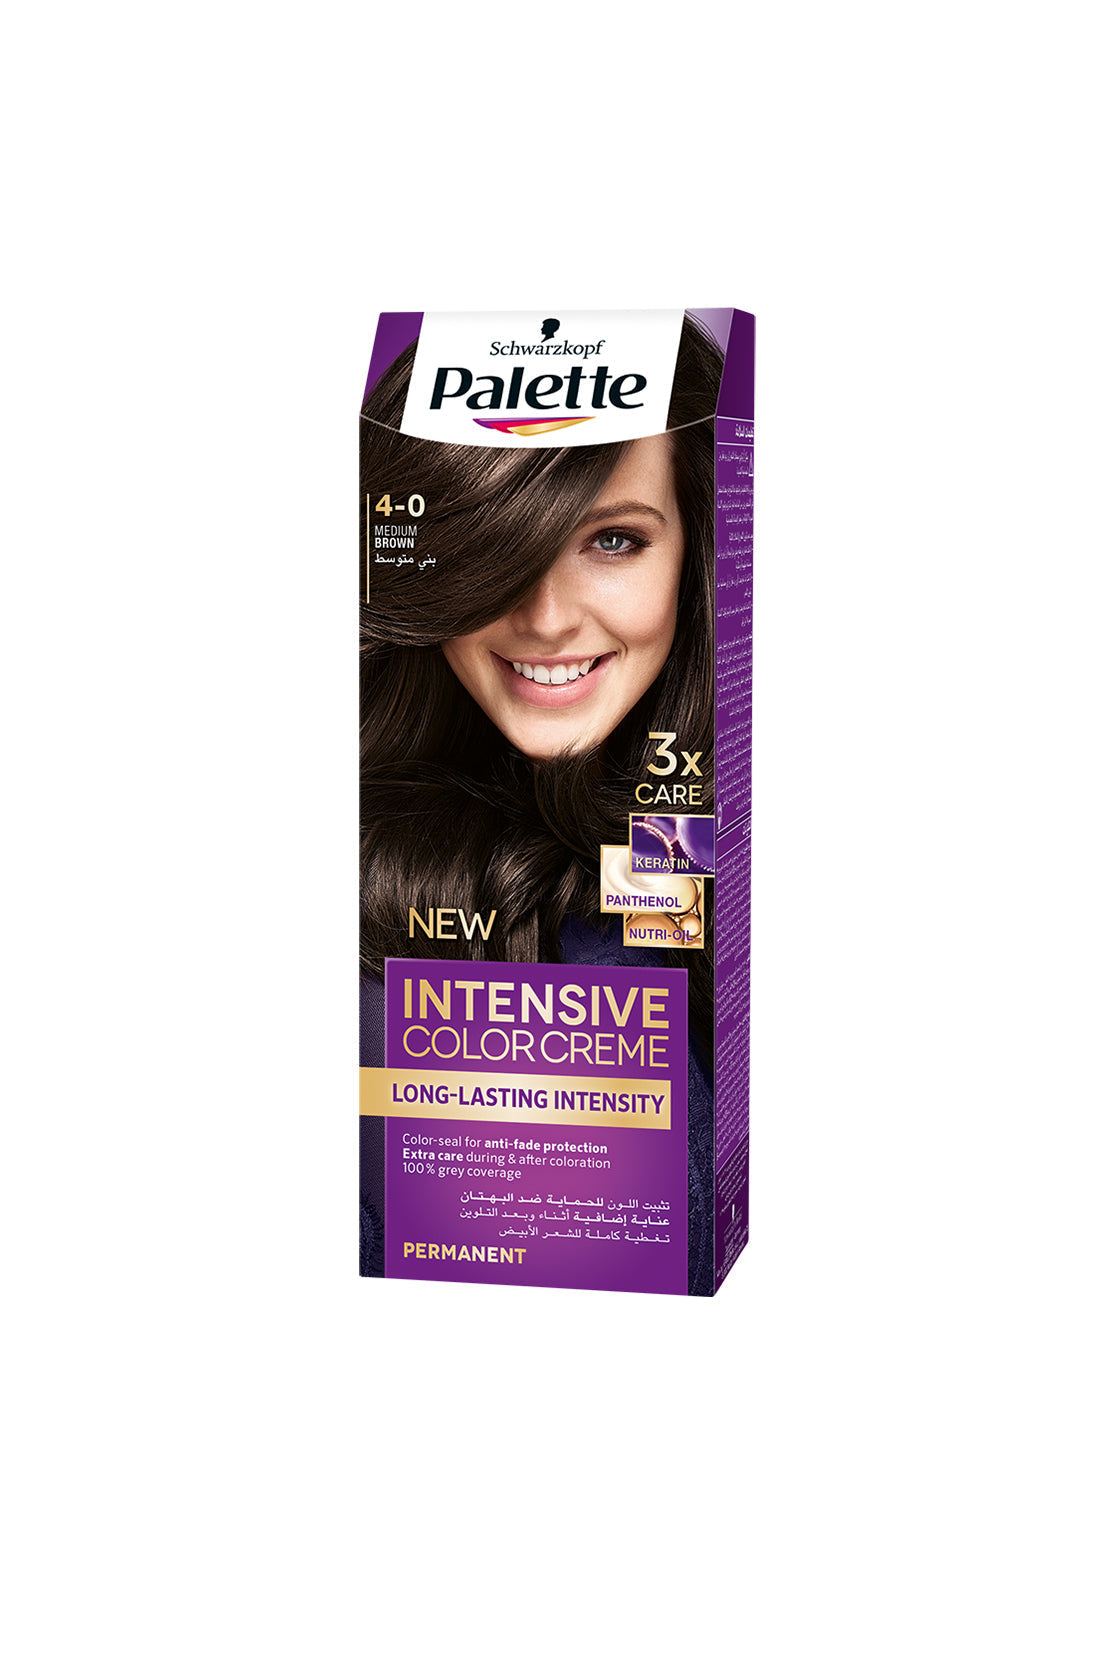 Intensive Color Creme with Long Lasting Intensity (4-0 Sparkling Brown) RIOS